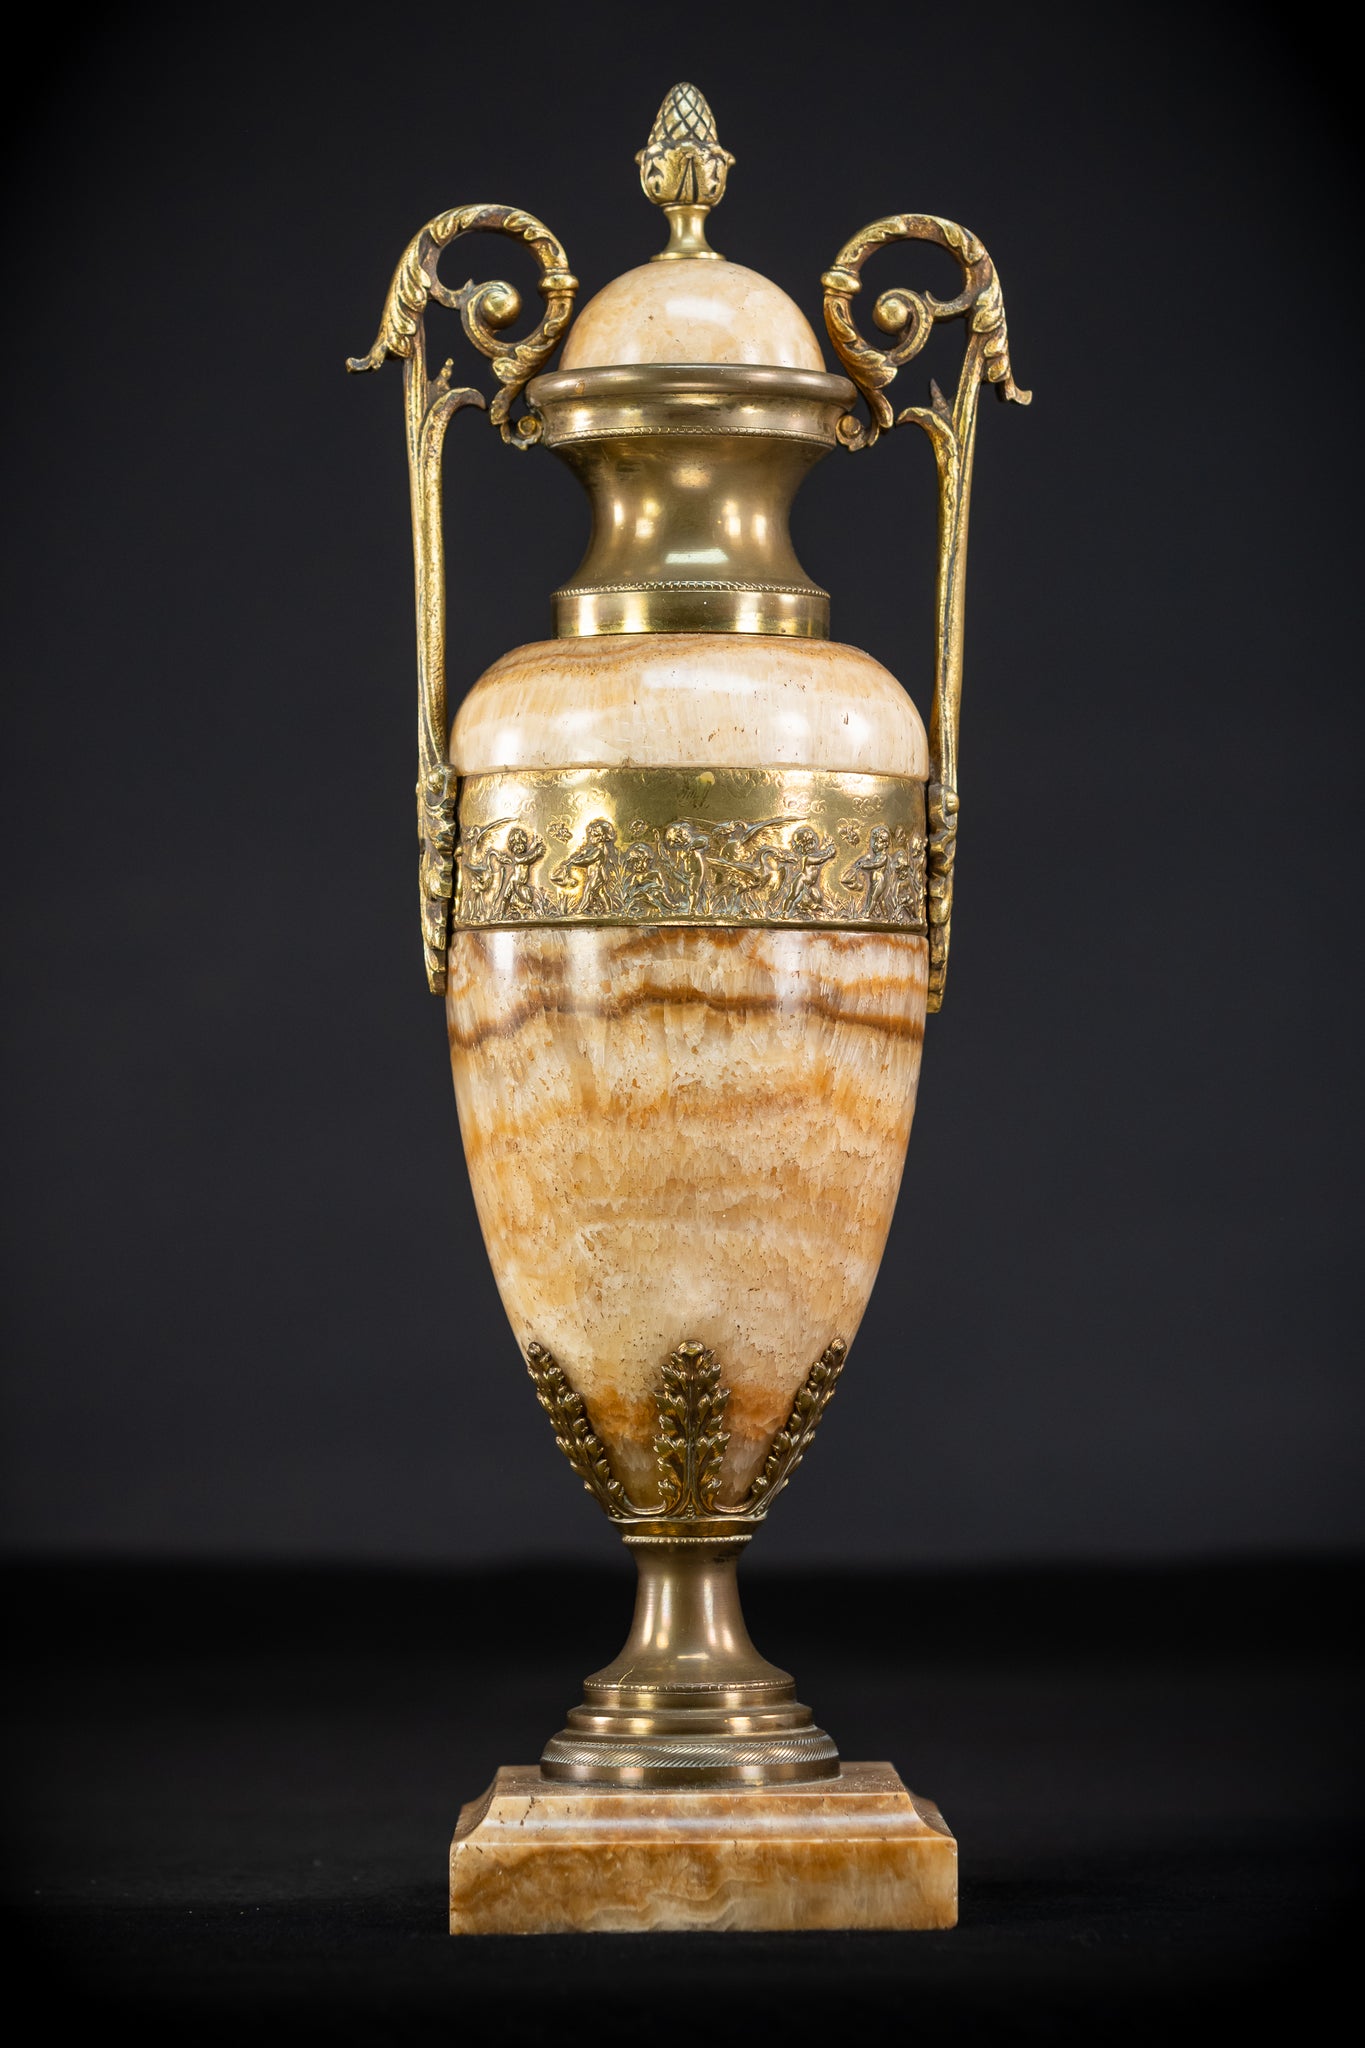 Pair of Marble and Gilt Bronze Urns | 1800s Antique | 14.2" / 36 cm